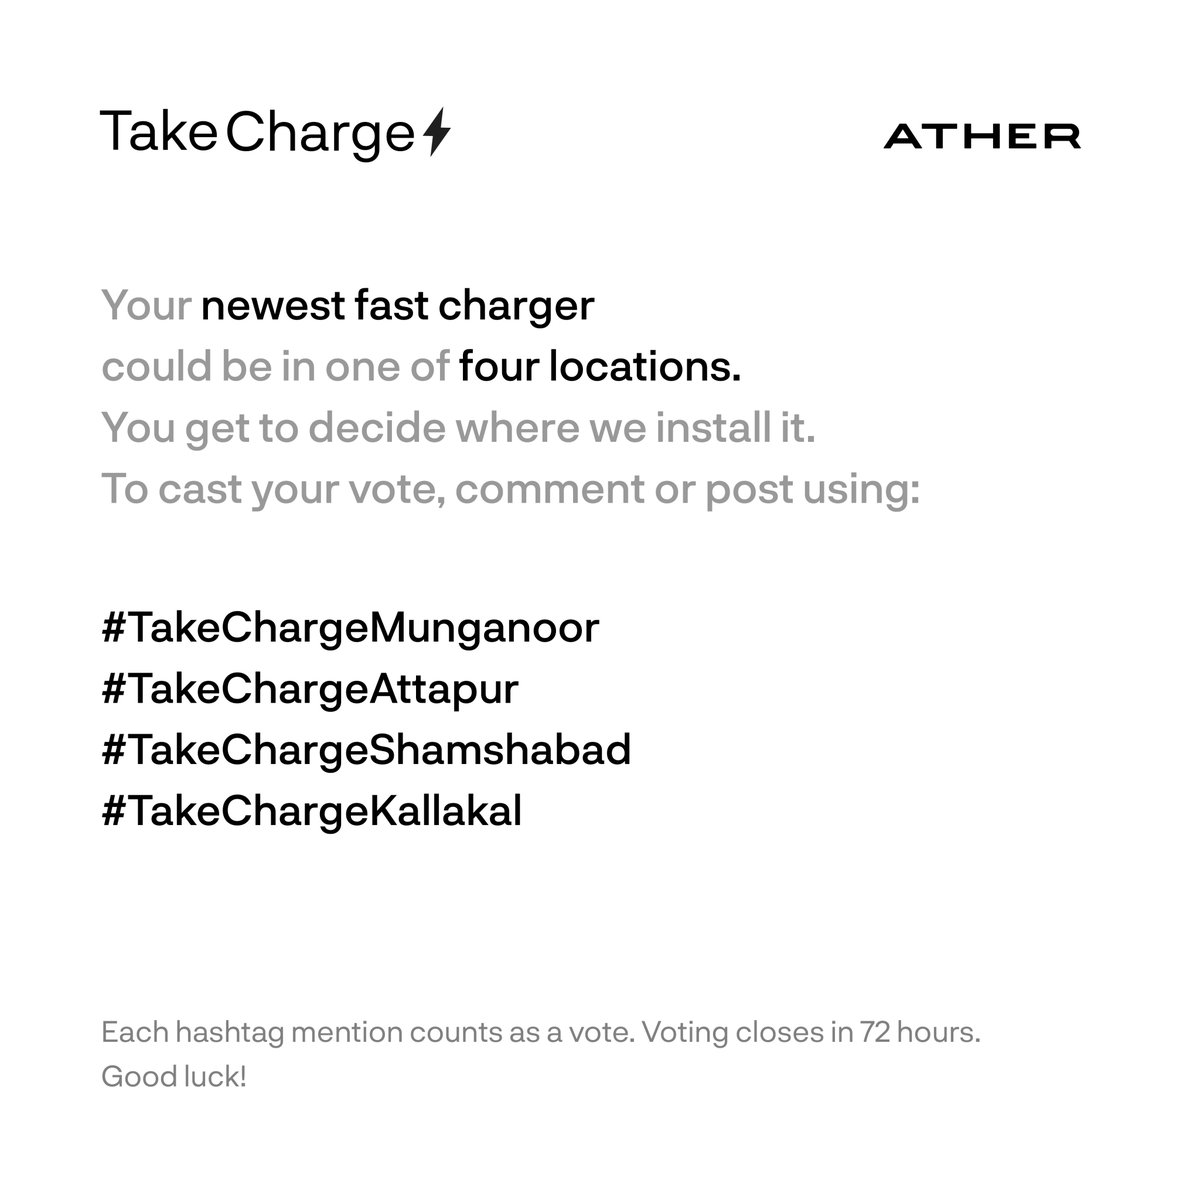 Remember to tag @atherenergy and use the hashtag of your preference to cast your vote.

#TakeCharge of your #AtherGrid, Hyderabad!

#Ather #AtherCommunity #Hyderabad #FastCharging #EVCharging